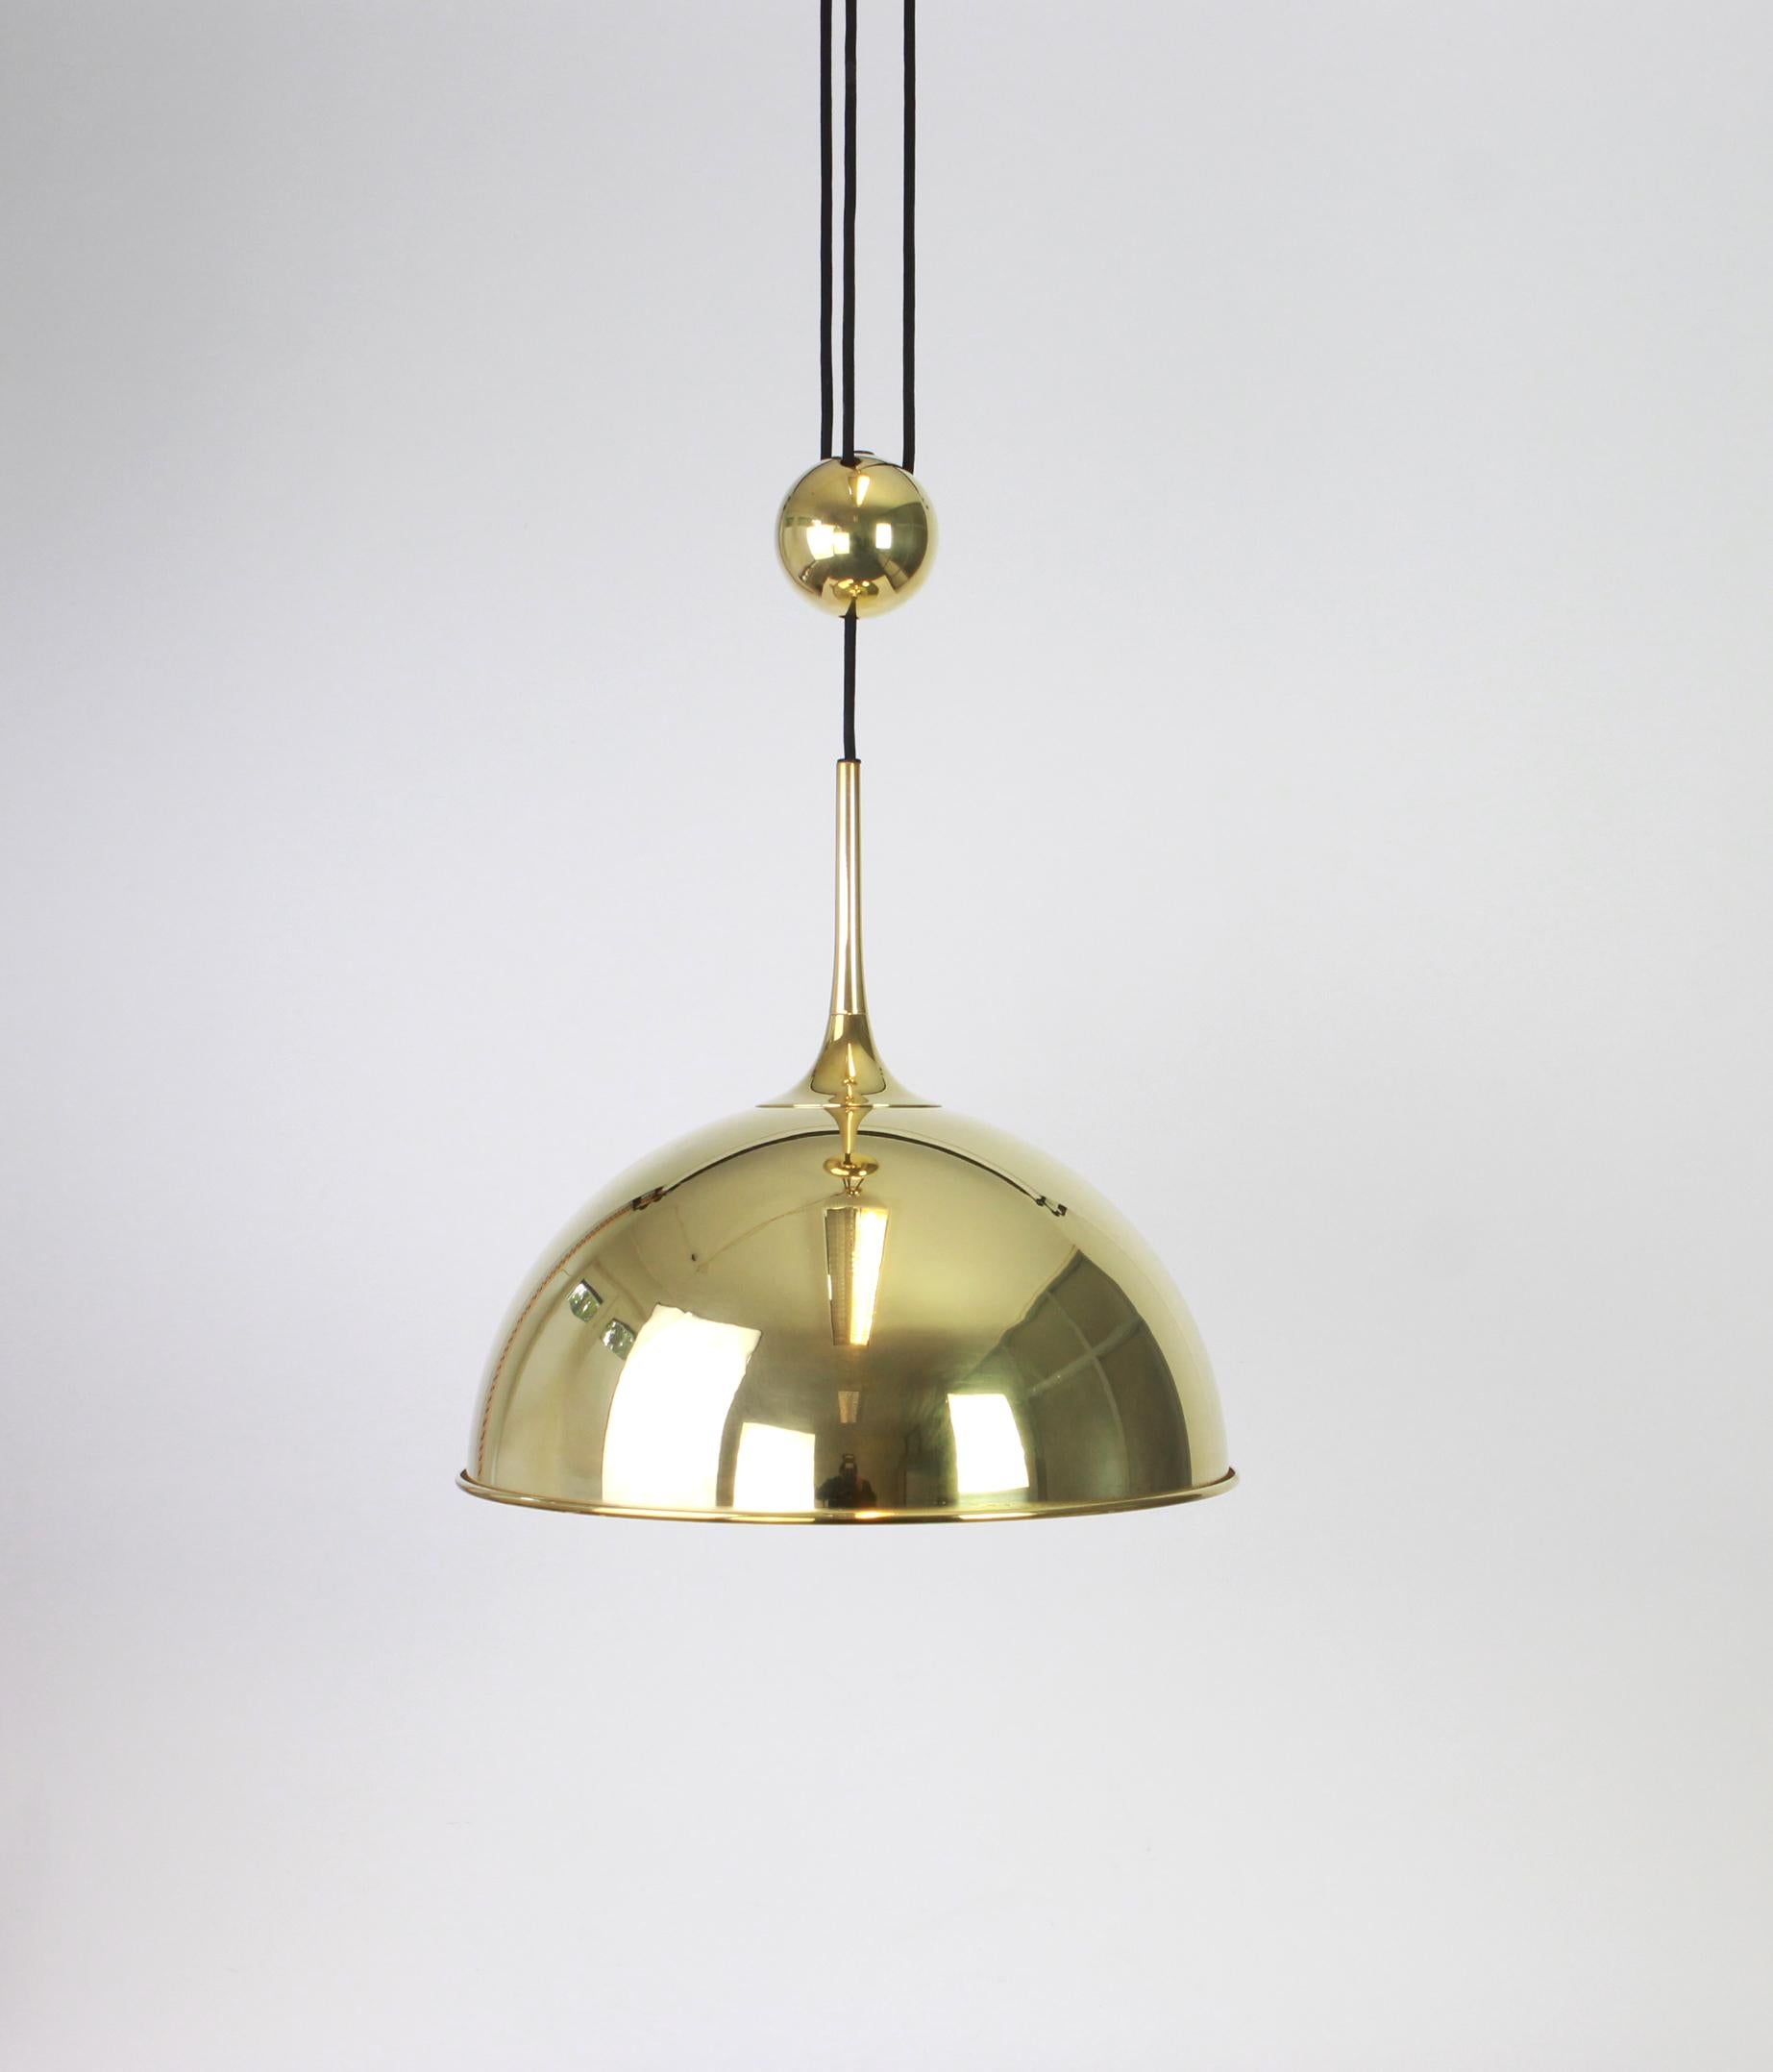 Large adjustable brass pendant light designed by Florian Schulz, Germany, 1970s.
High quality and in very good condition. Cleaned, well-wired and ready to use.
The fixture requires one standard bulb and is compatible with the US/UK/ etc.